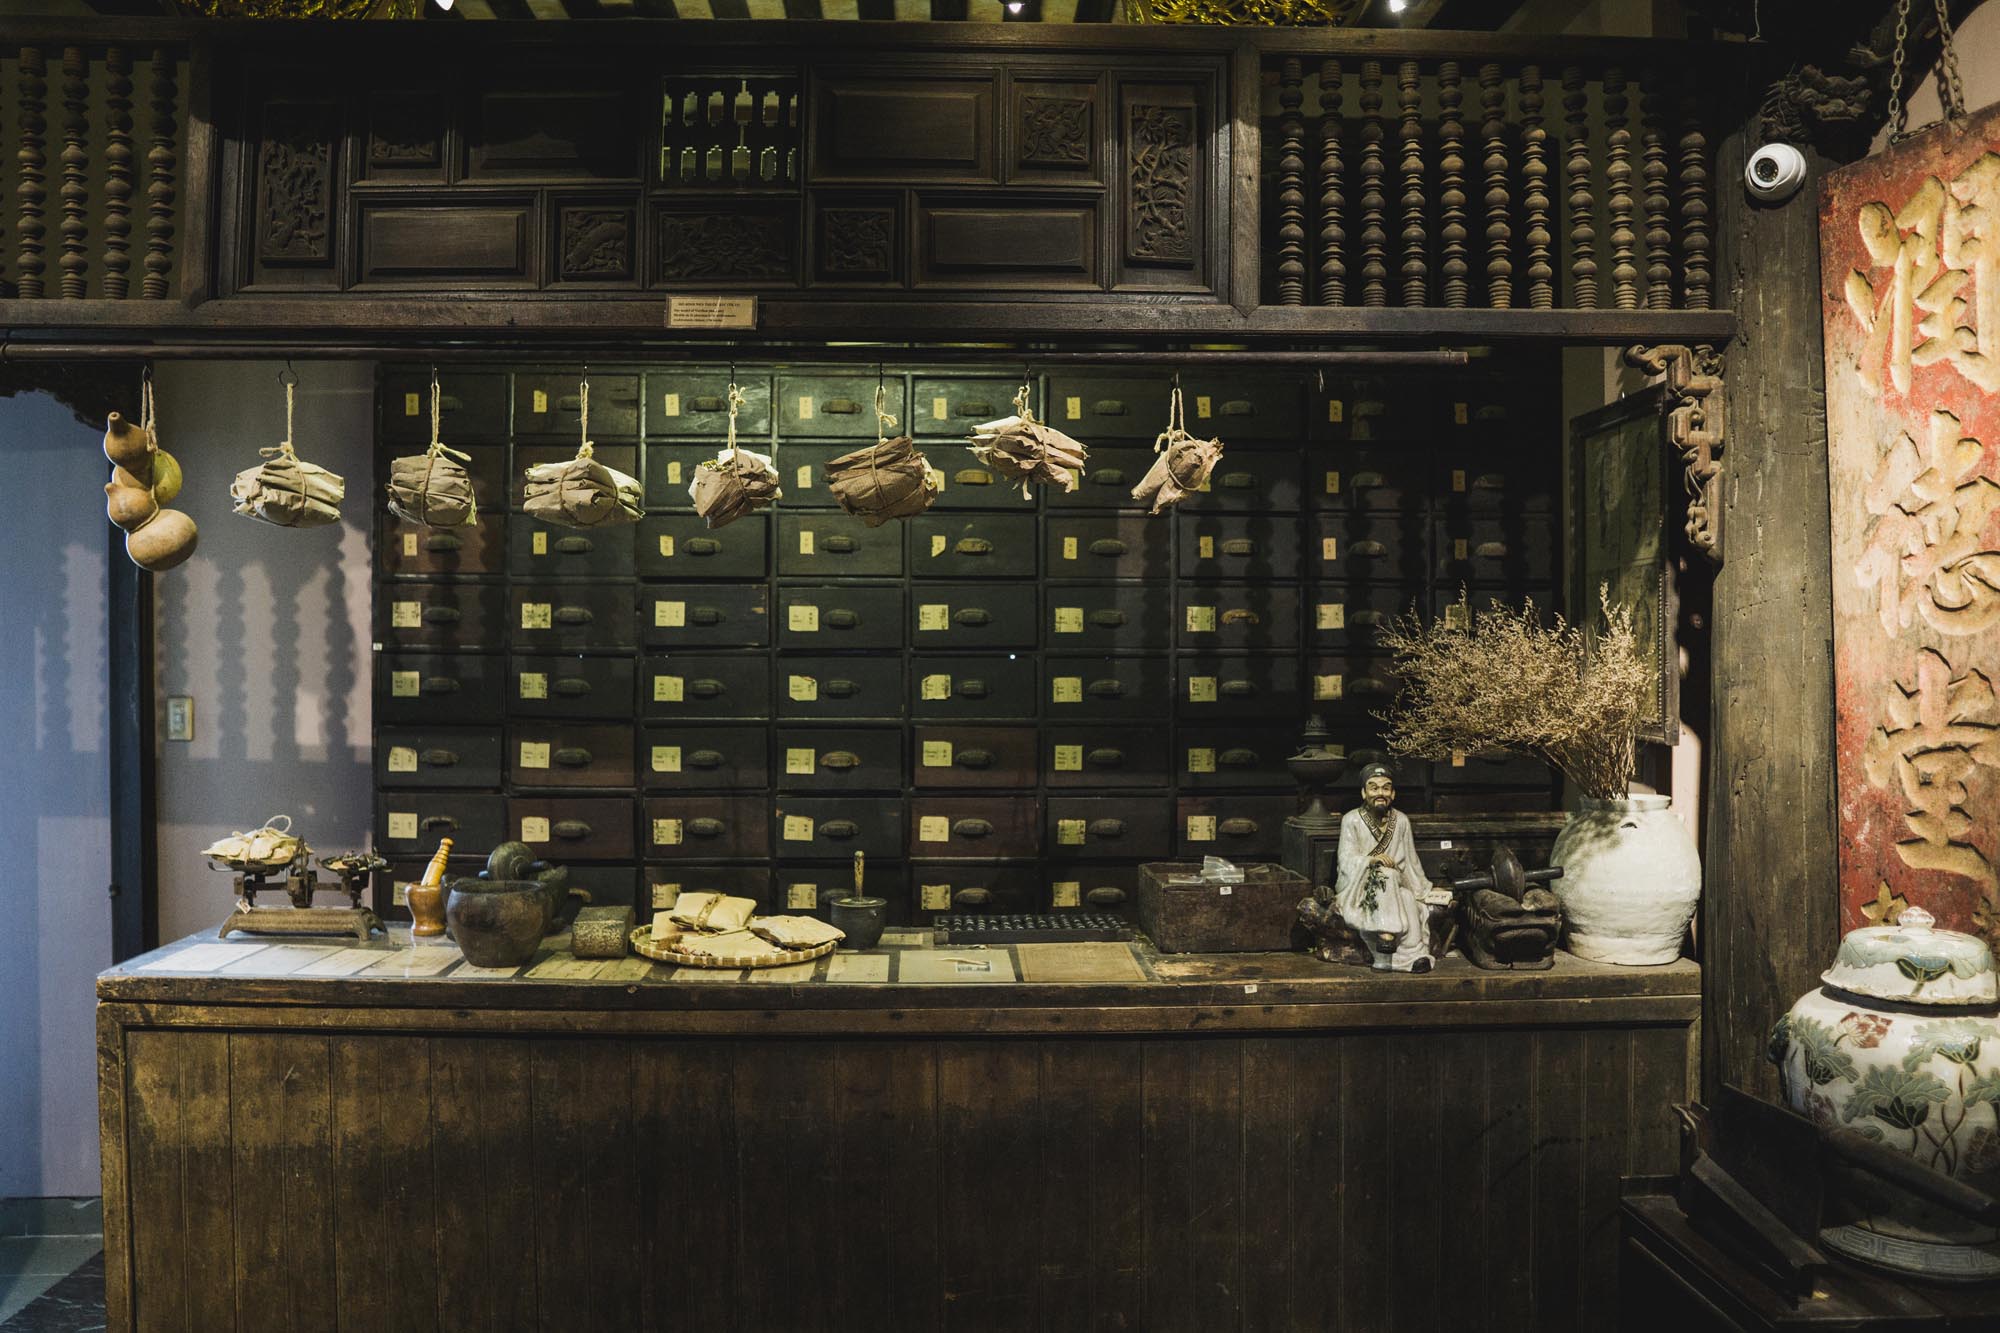 The Fito Museum of Traditional Vietnamese Medicine was founded by Dr Le Khac Tam in 2003, and showcases the evolution of Vietnam’s traditional medicine. Photo by Nam Quoc Tran